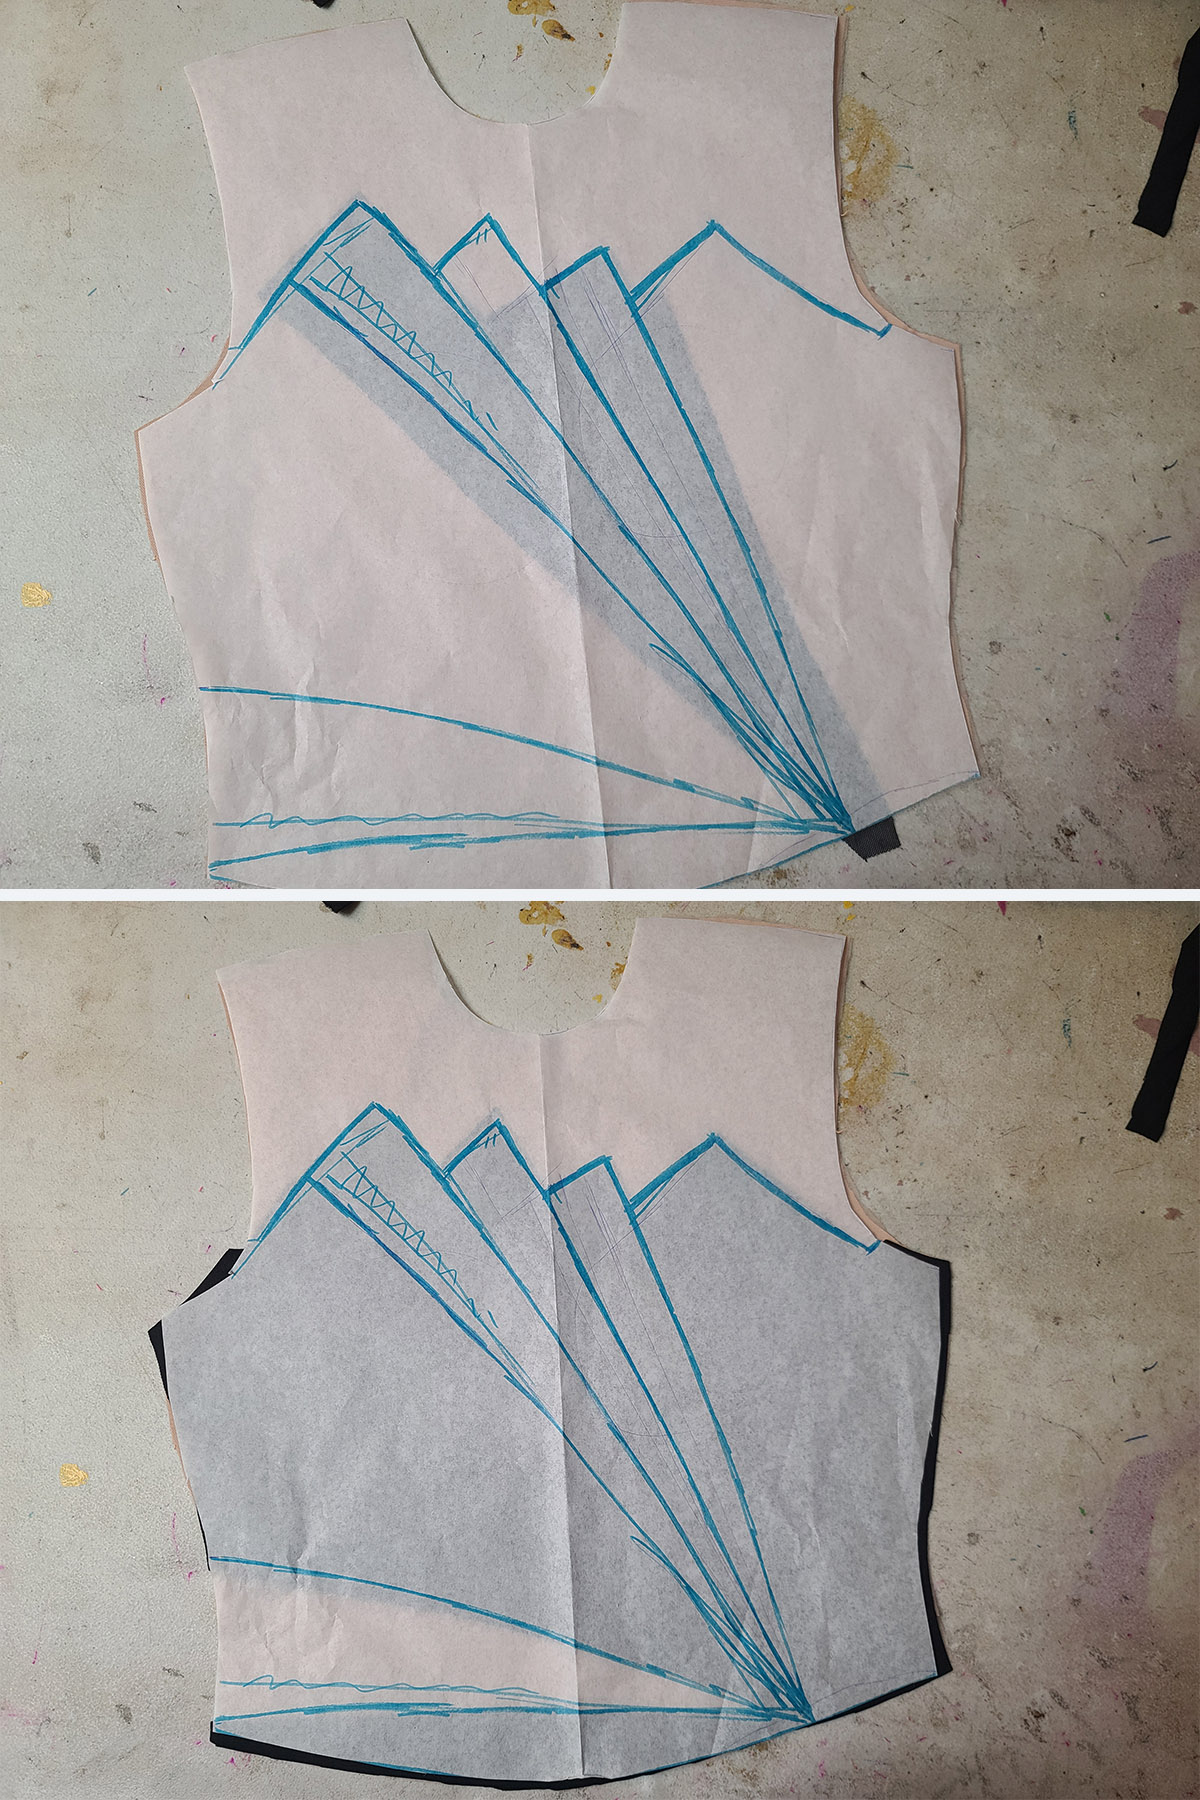 A 2 part image showing the original pattern laid over the bodice pieces.